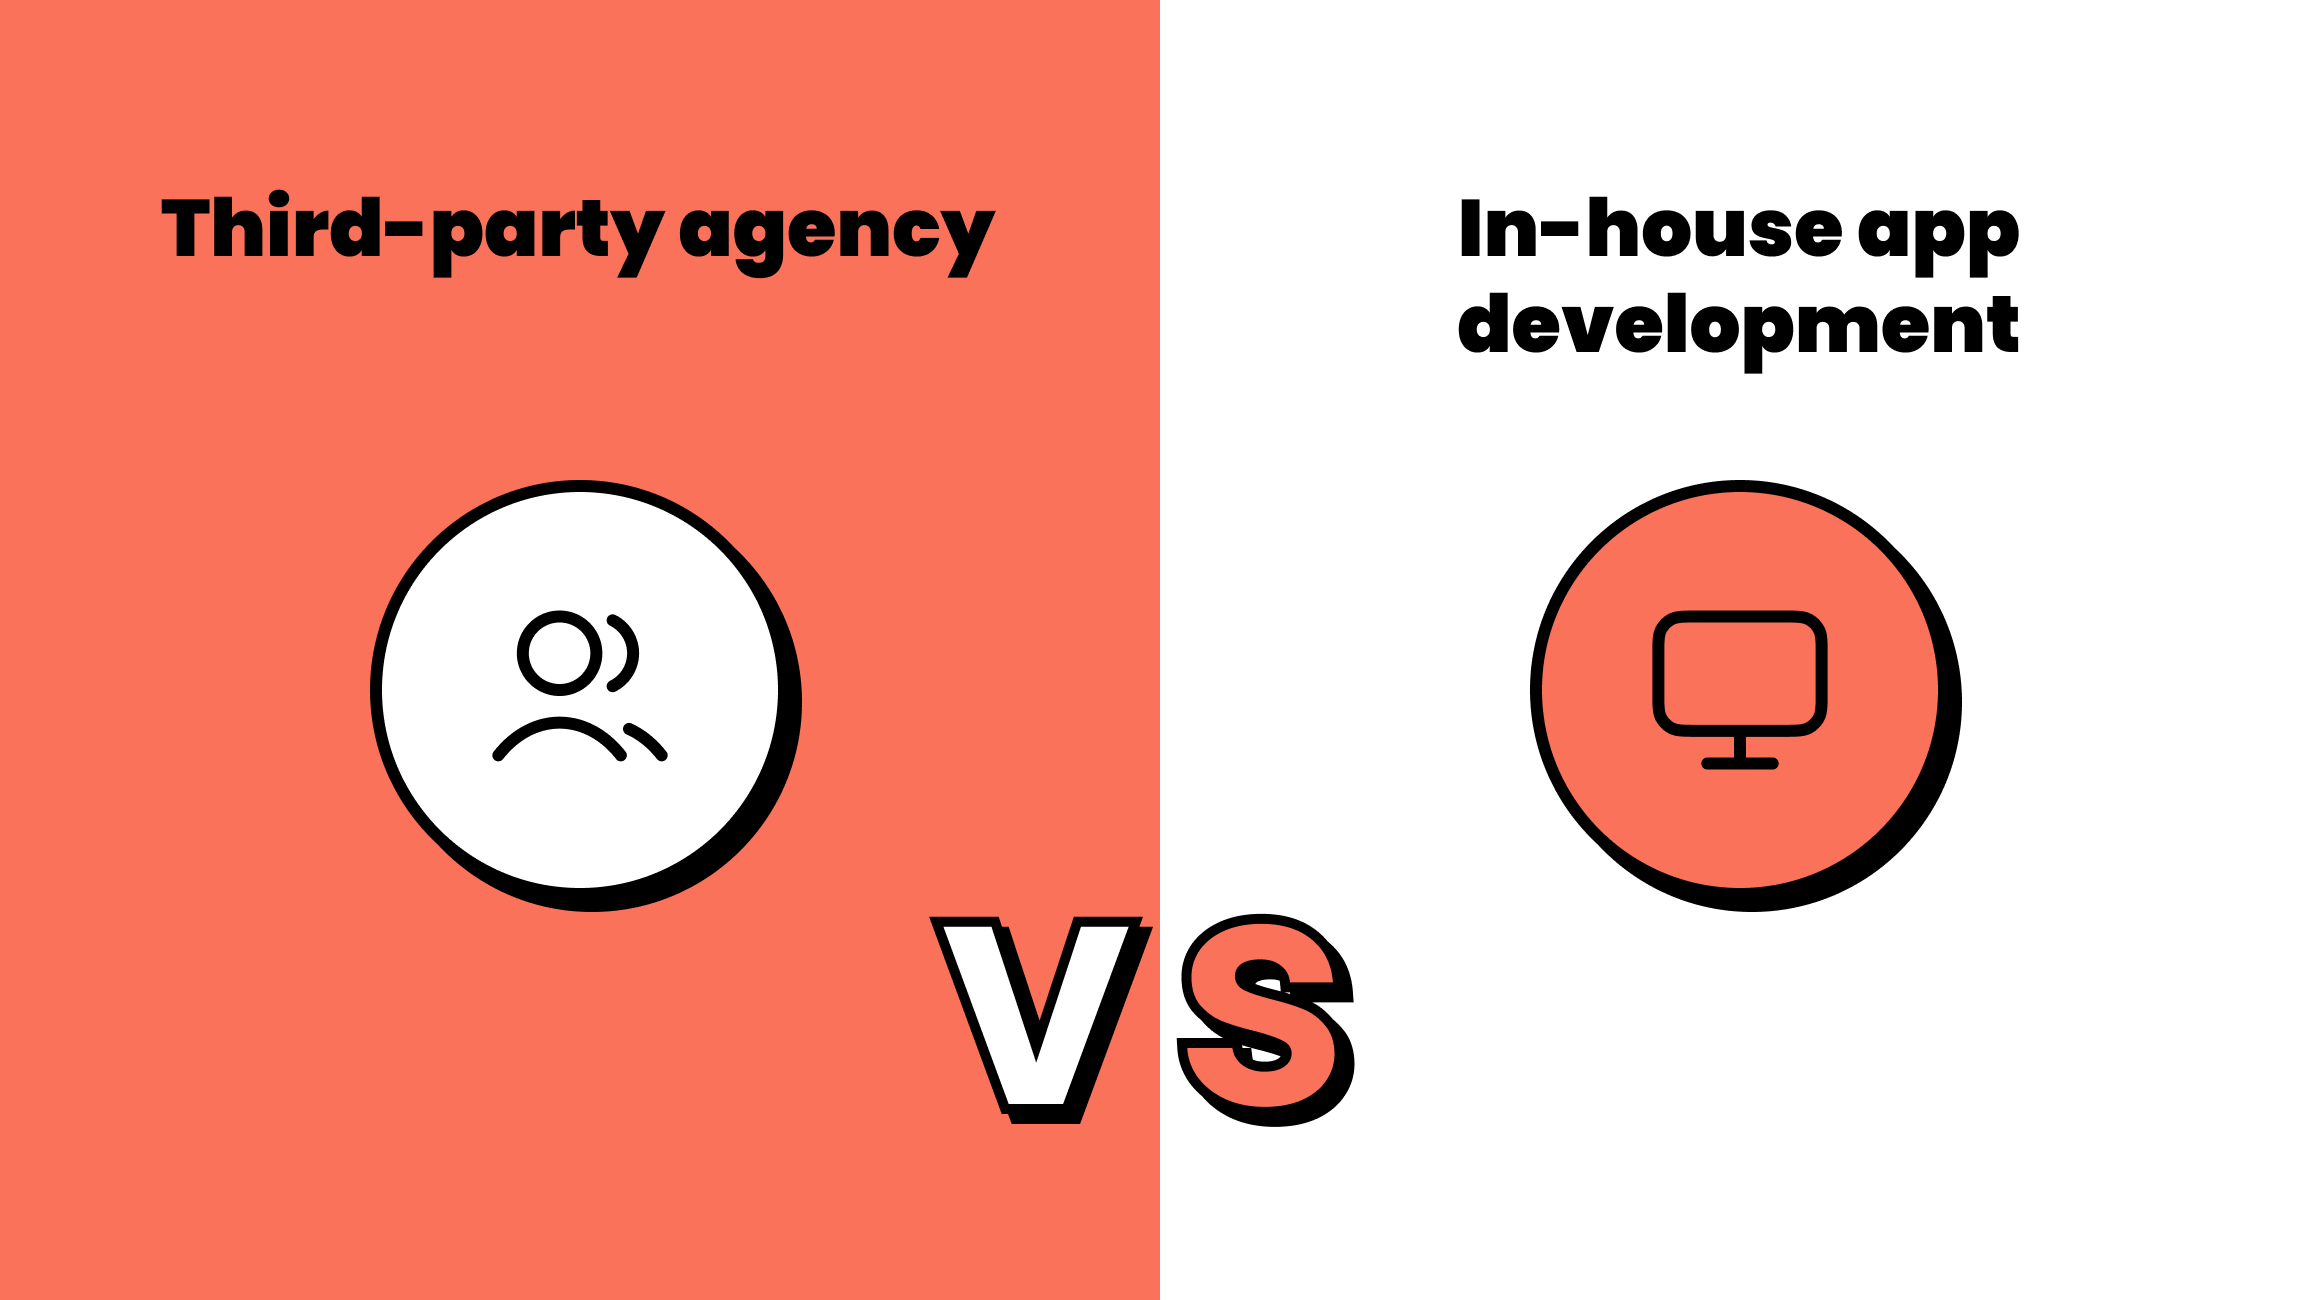 Third-party vs in-house development